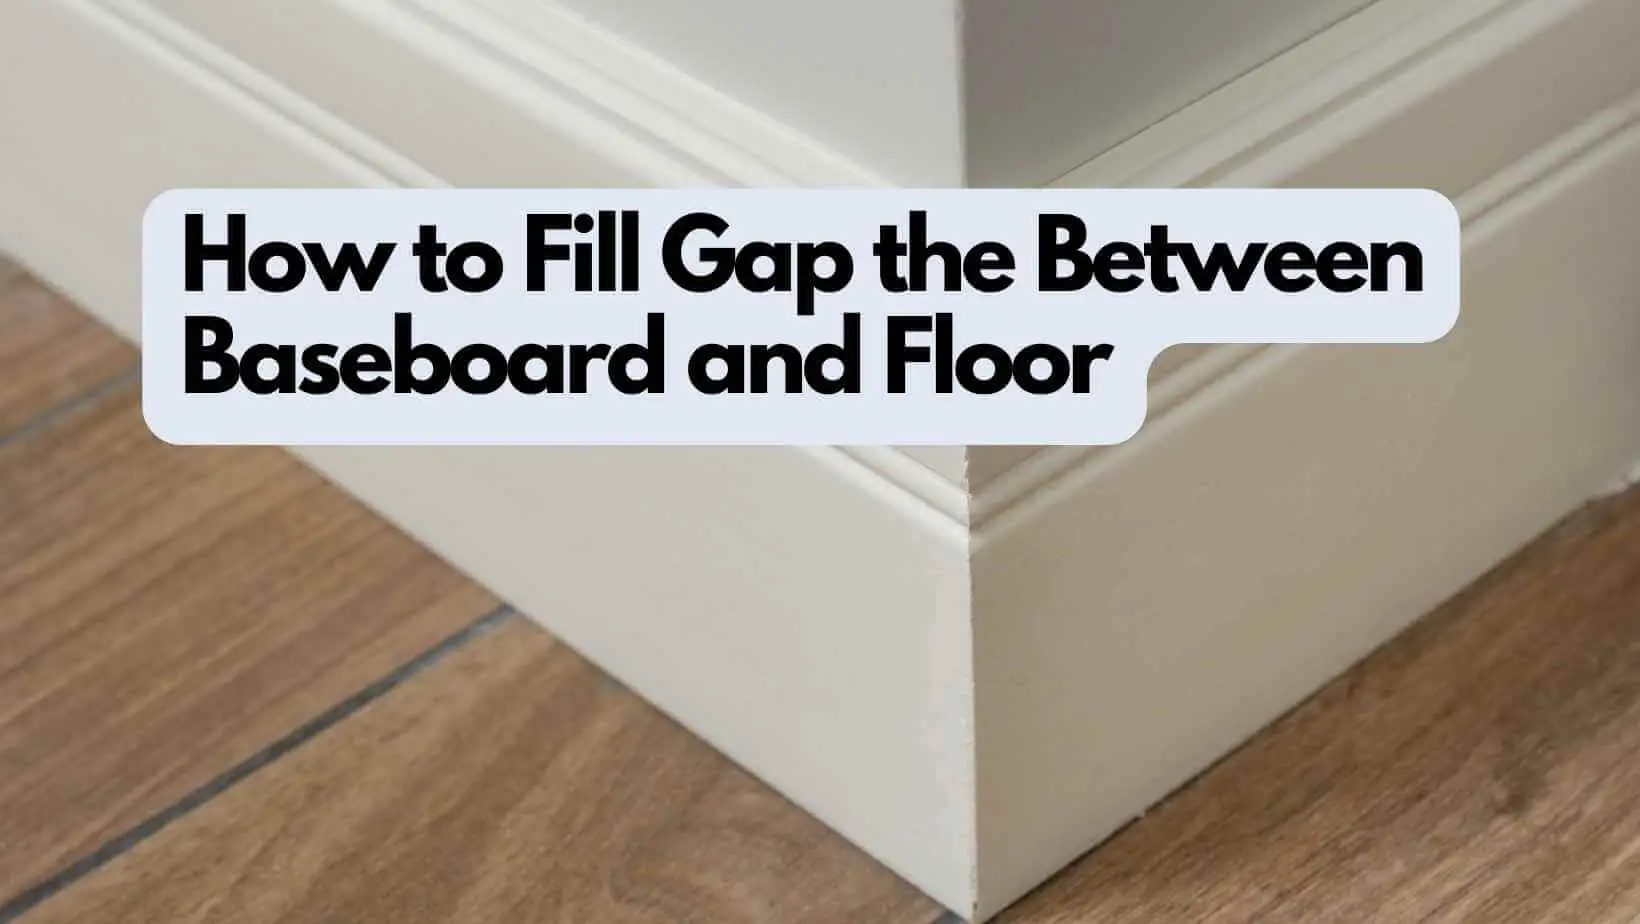 How to Fill Gap Between Baseboard and Floor